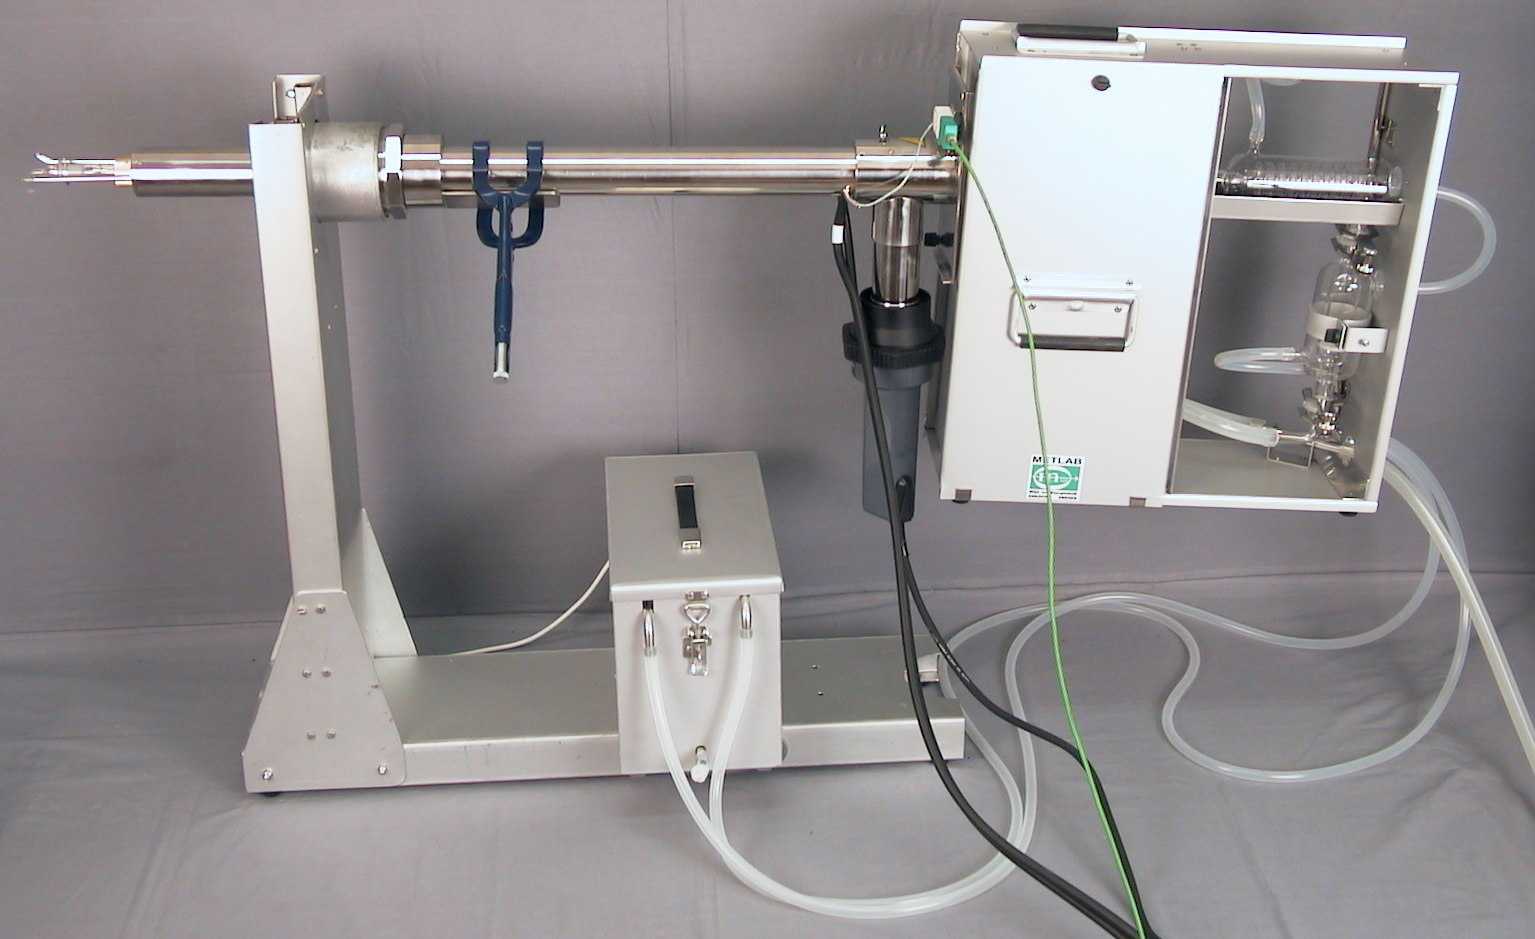 Dioxin probe with cabinet housing filter holder for 120mm flat filter and XAD2 ampoule